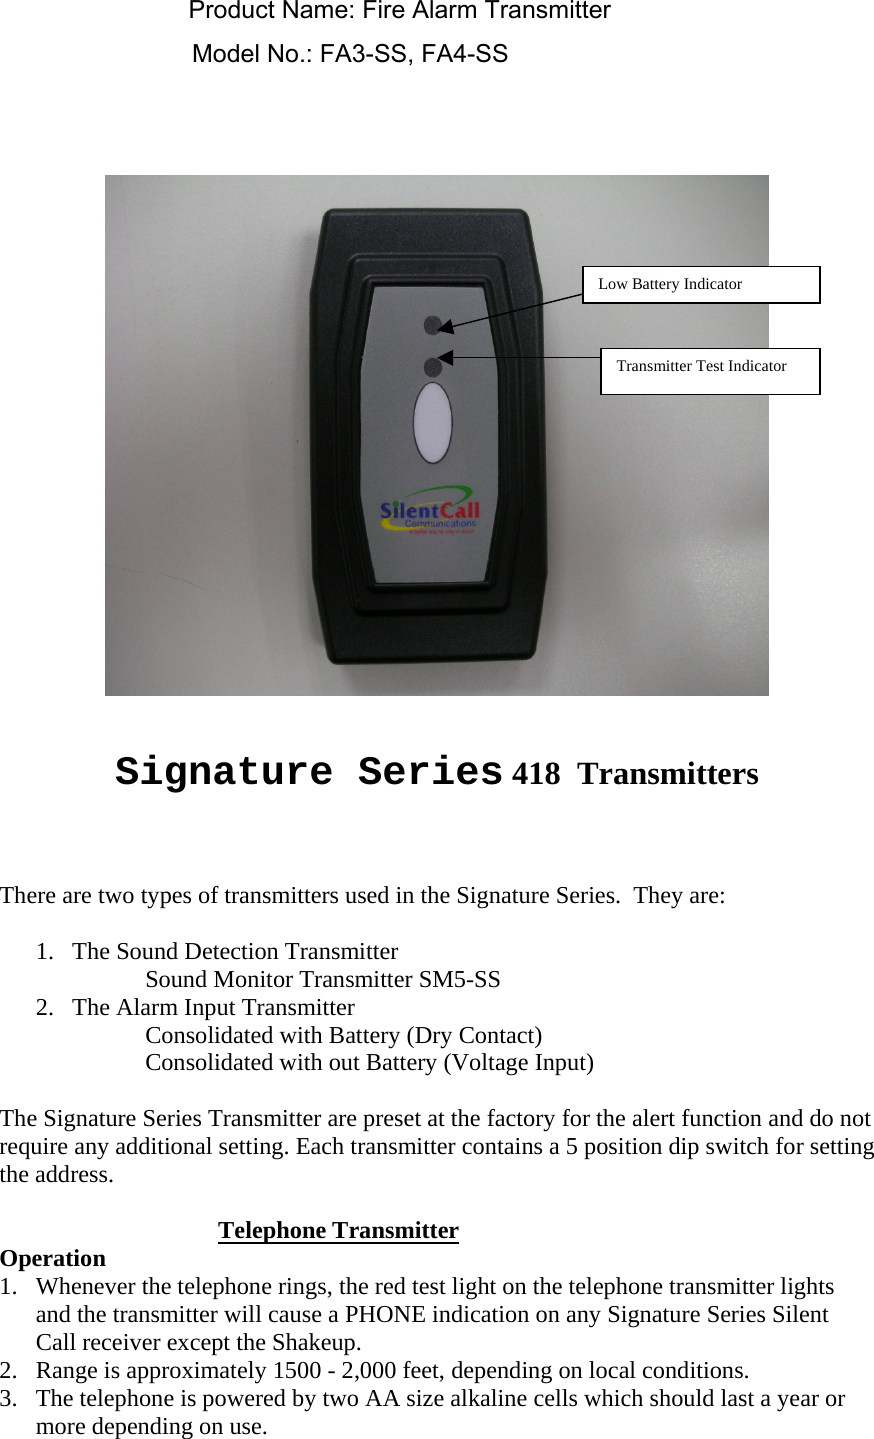    Signature Series 418  Transmitters    There are two types of transmitters used in the Signature Series.  They are:   1.  The Sound Detection Transmitter Sound Monitor Transmitter SM5-SS 2.  The Alarm Input Transmitter Consolidated with Battery (Dry Contact) Consolidated with out Battery (Voltage Input)  The Signature Series Transmitter are preset at the factory for the alert function and do not require any additional setting. Each transmitter contains a 5 position dip switch for setting the address.   Telephone Transmitter Operation 1.  Whenever the telephone rings, the red test light on the telephone transmitter lights and the transmitter will cause a PHONE indication on any Signature Series Silent Call receiver except the Shakeup. 2.  Range is approximately 1500 - 2,000 feet, depending on local conditions.   3.  The telephone is powered by two AA size alkaline cells which should last a year or more depending on use.    Low Battery Indicator Transmitter Test Indicator Product Name: Fire Alarm TransmitterModel No.: FA3-SS, FA4-SS